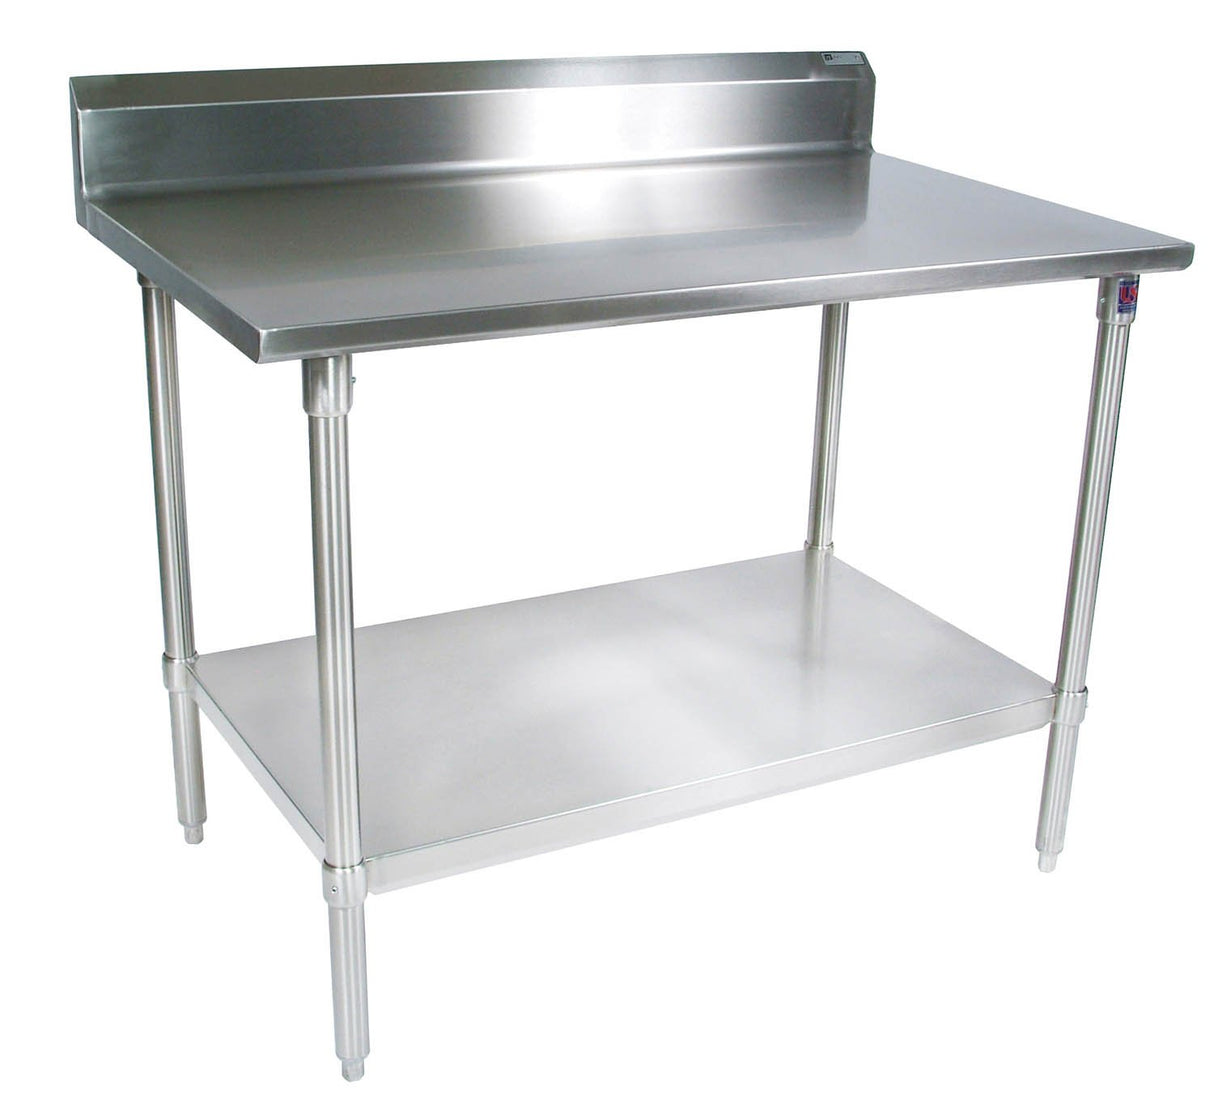 John Boos ST4R5-3036SSK 14 Gauge Stainless Steel Work Table with 5" Rear Riser, Base and Shelf, 36" x 30"